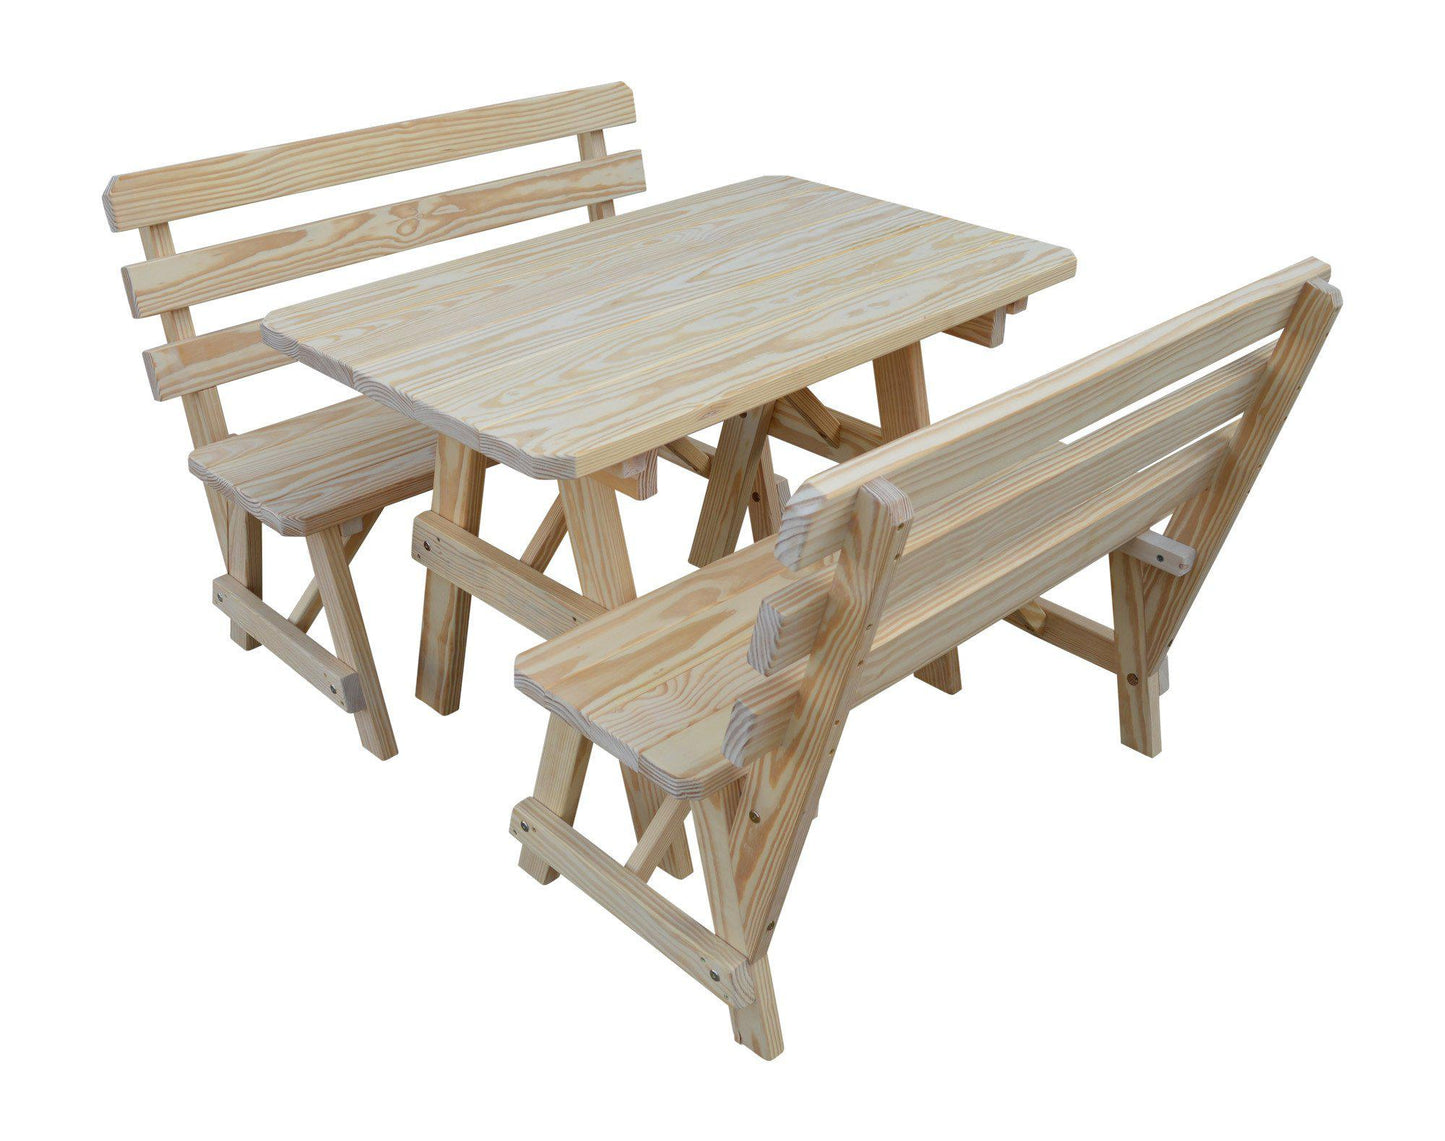 A&L Furniture Co. Yellow Pine 4' Table w/2 Backed Benches - LEAD TIME TO SHIP 10 BUSINESS DAYS